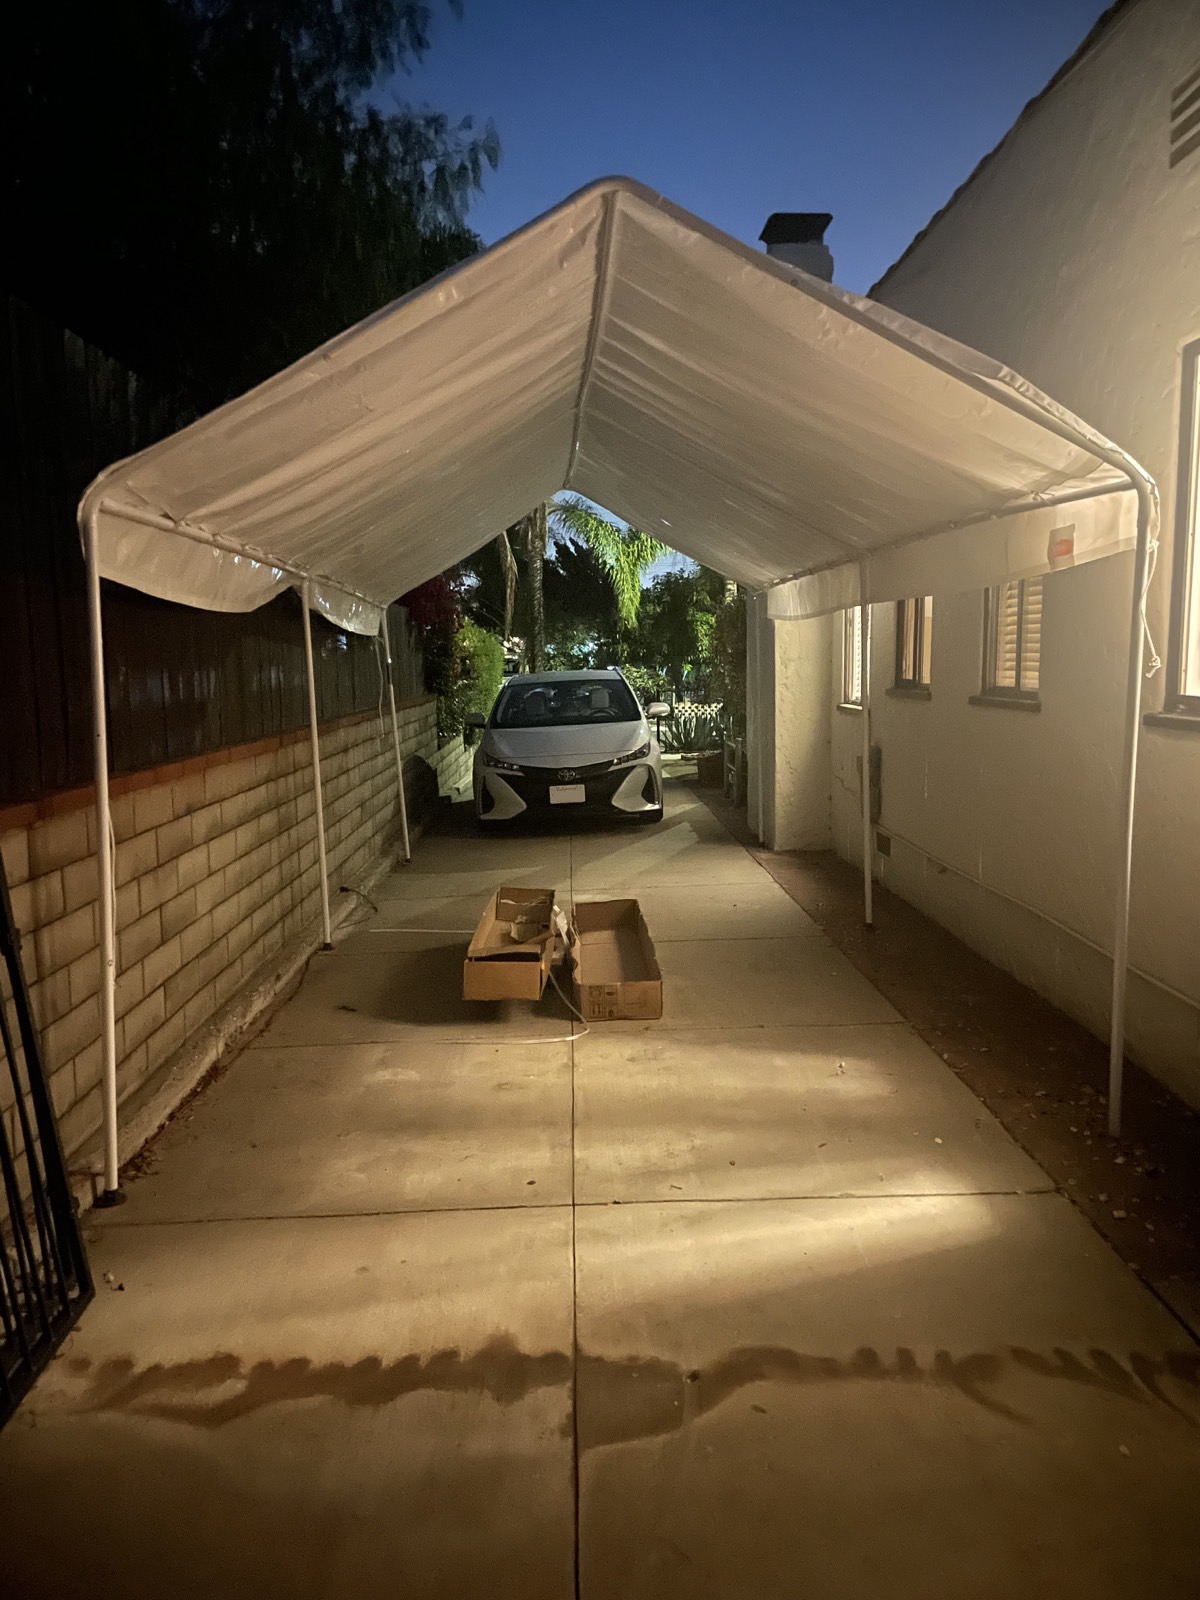 A simple carport—tarp over a tent structure made of metal tubing—assembled in a driveway